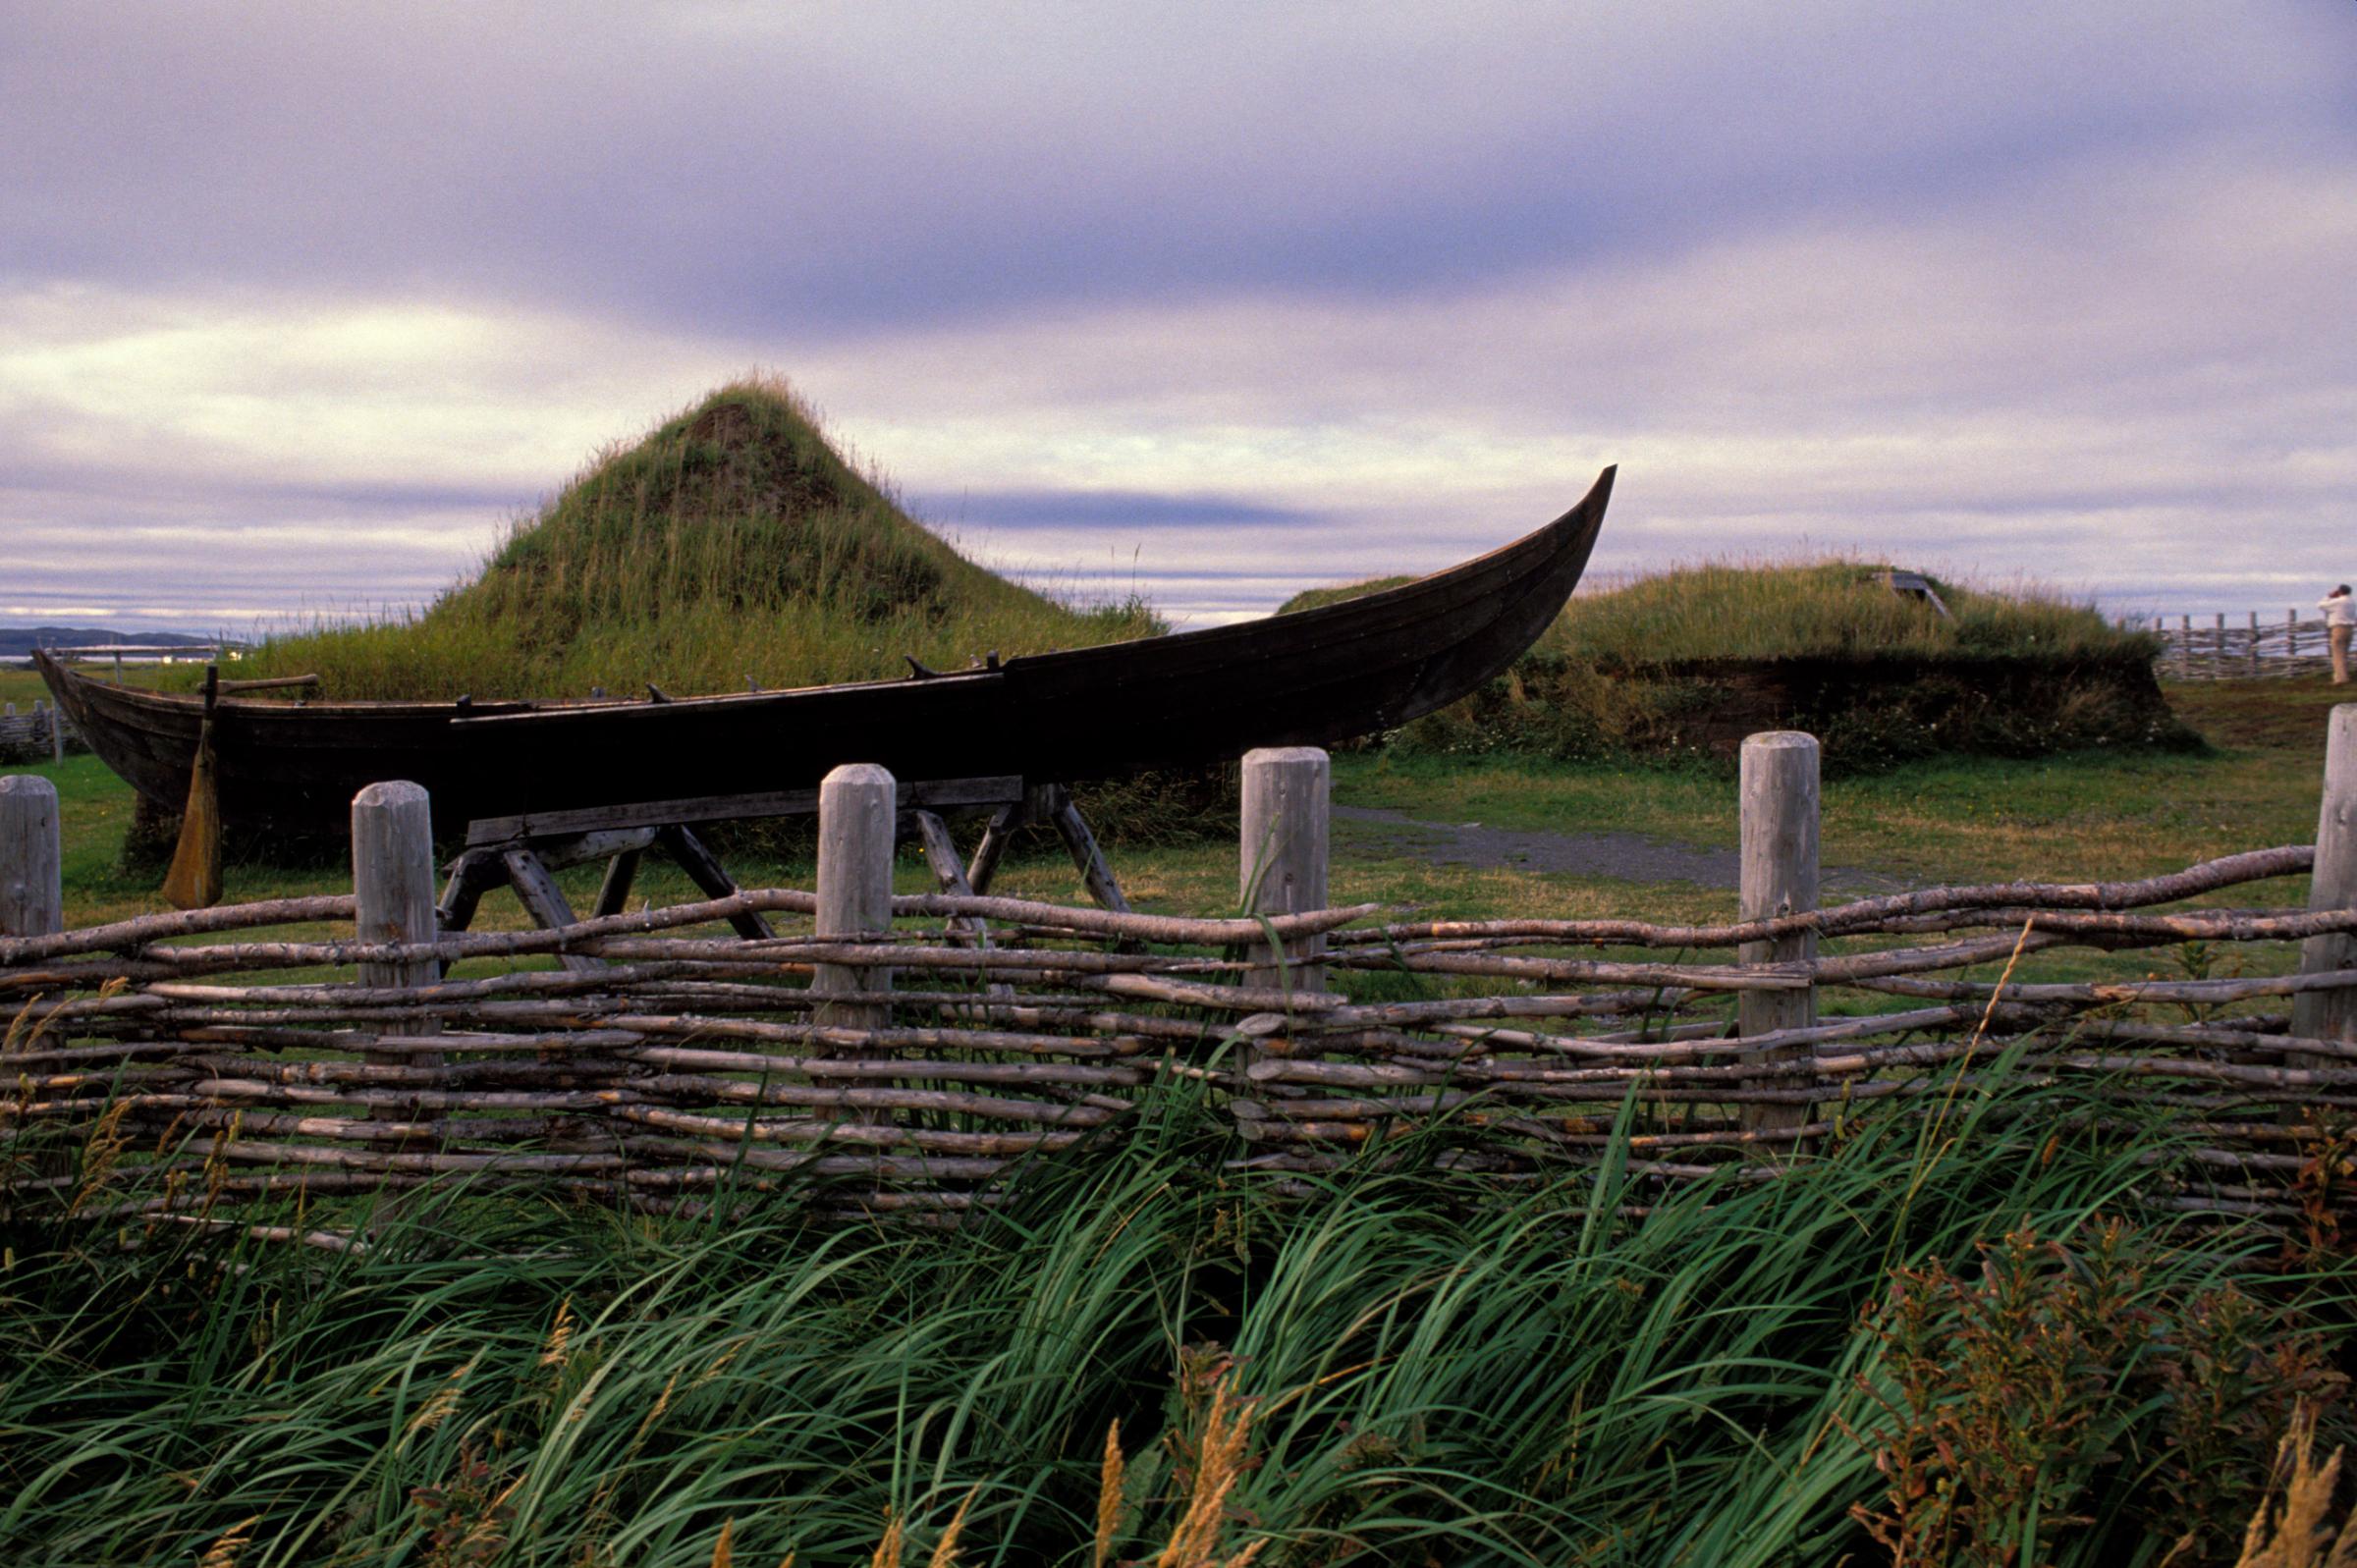 Canada, Newfoundland, L'anse Aux Meadows Nhp, Replicas Of Norse Houses From 1000 Years Ago.